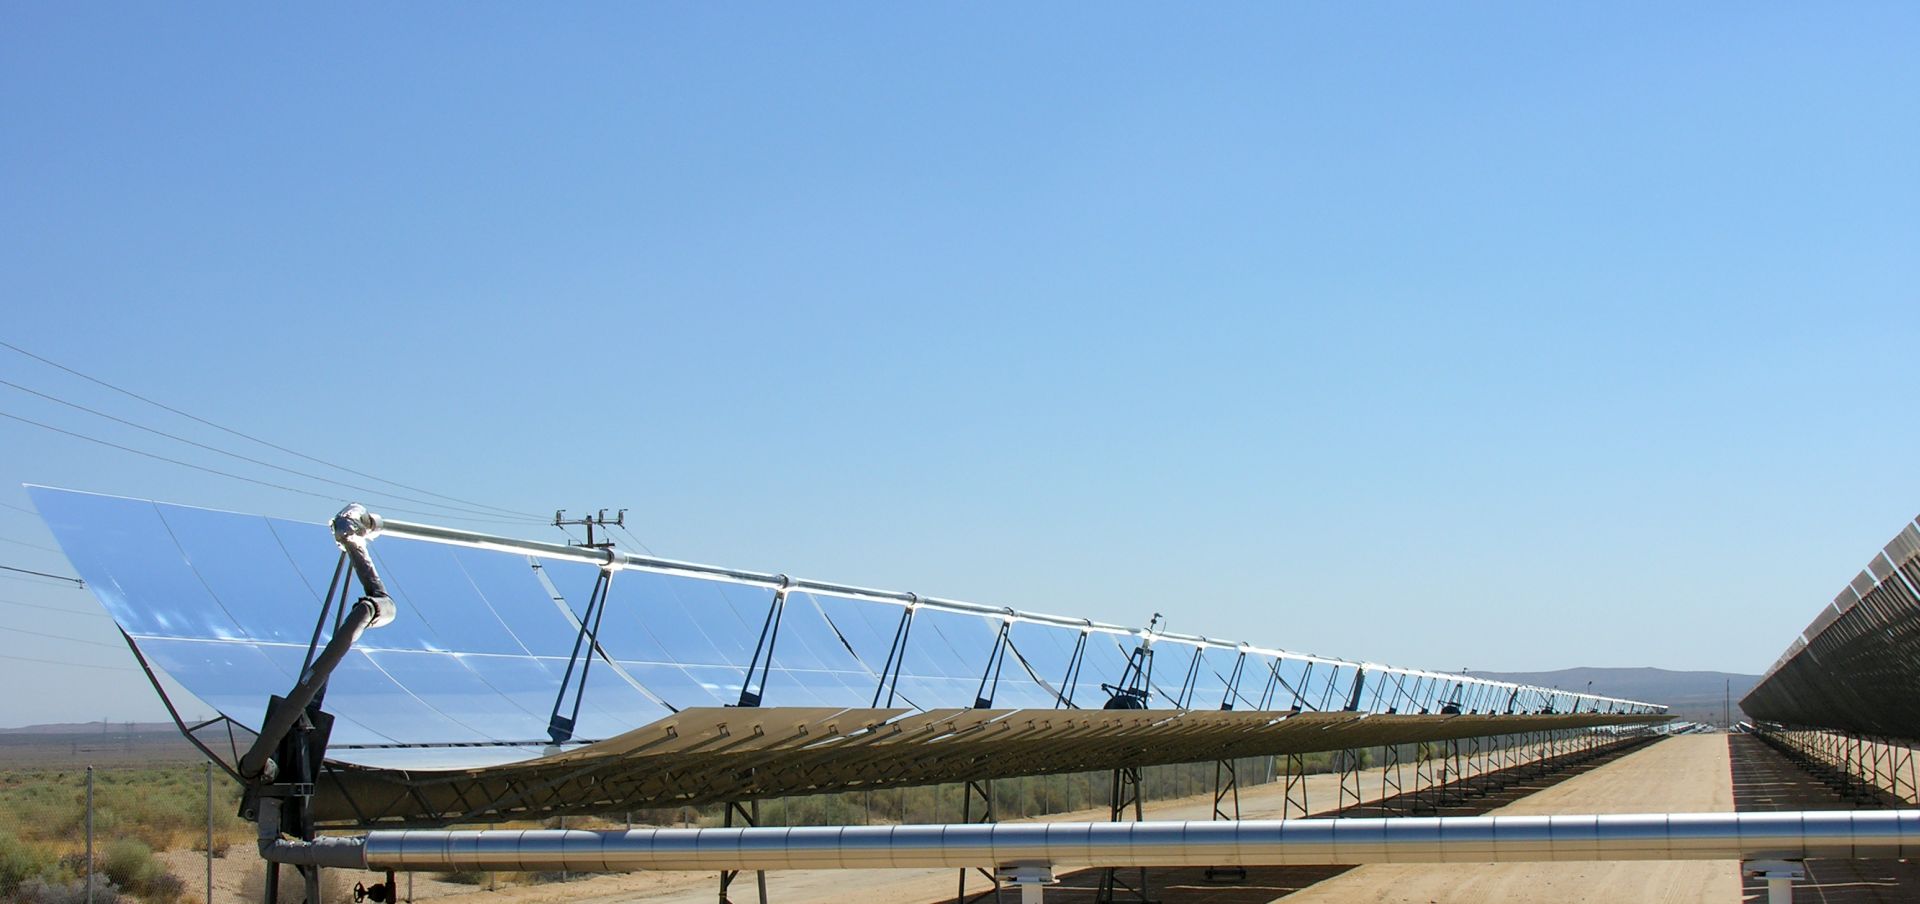 Solar trough reflecting a blue sky with desert in the background